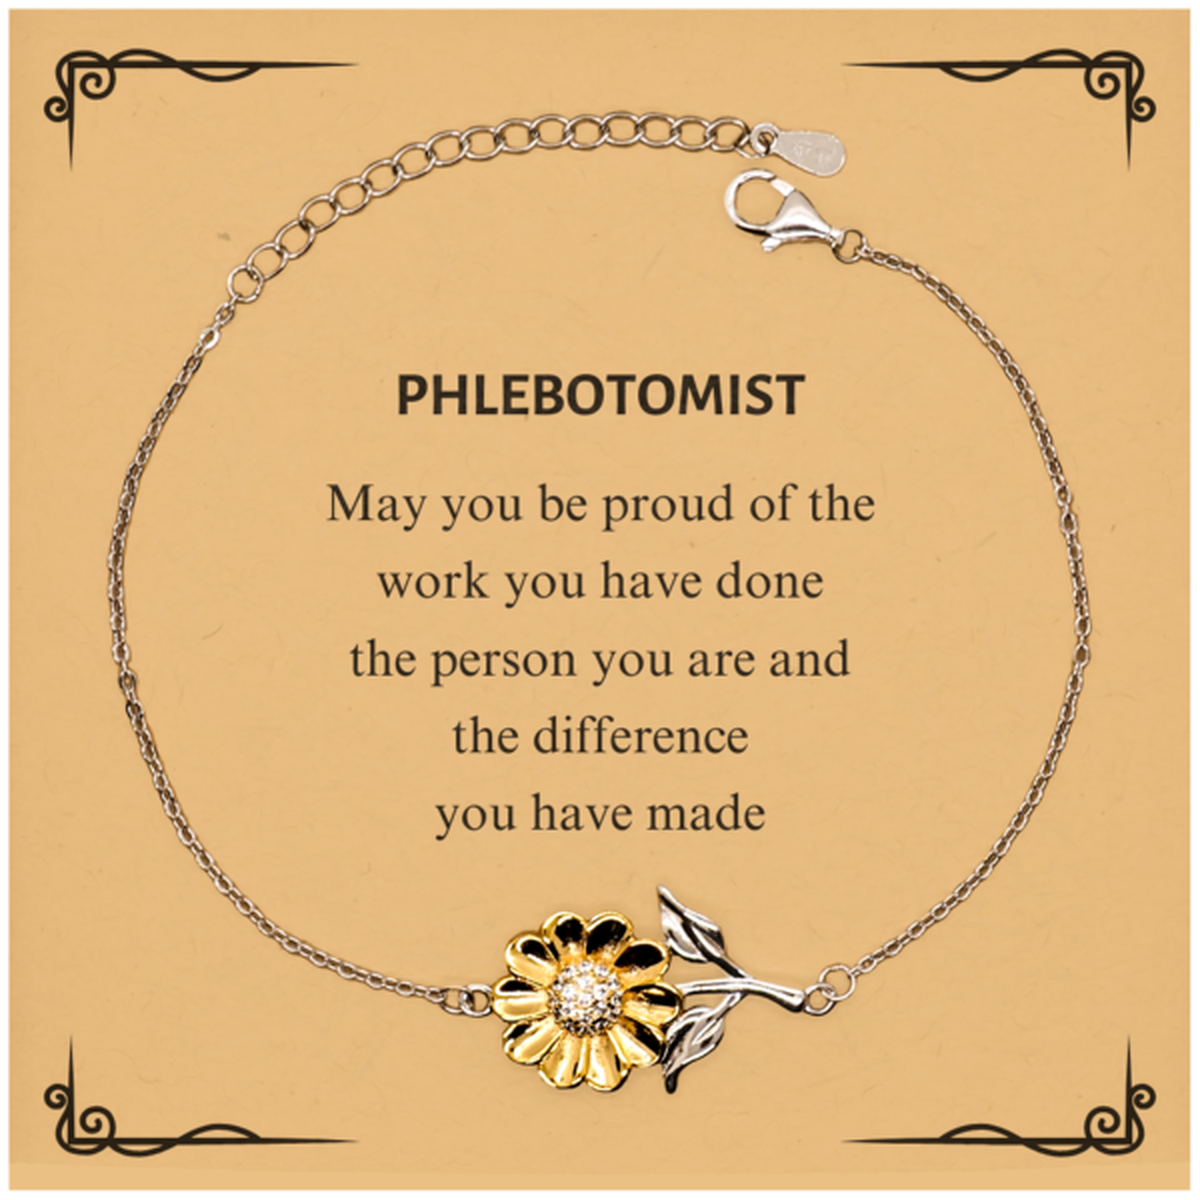 Phlebotomist May you be proud of the work you have done, Retirement Phlebotomist Sunflower Bracelet for Colleague Appreciation Gifts Amazing for Phlebotomist